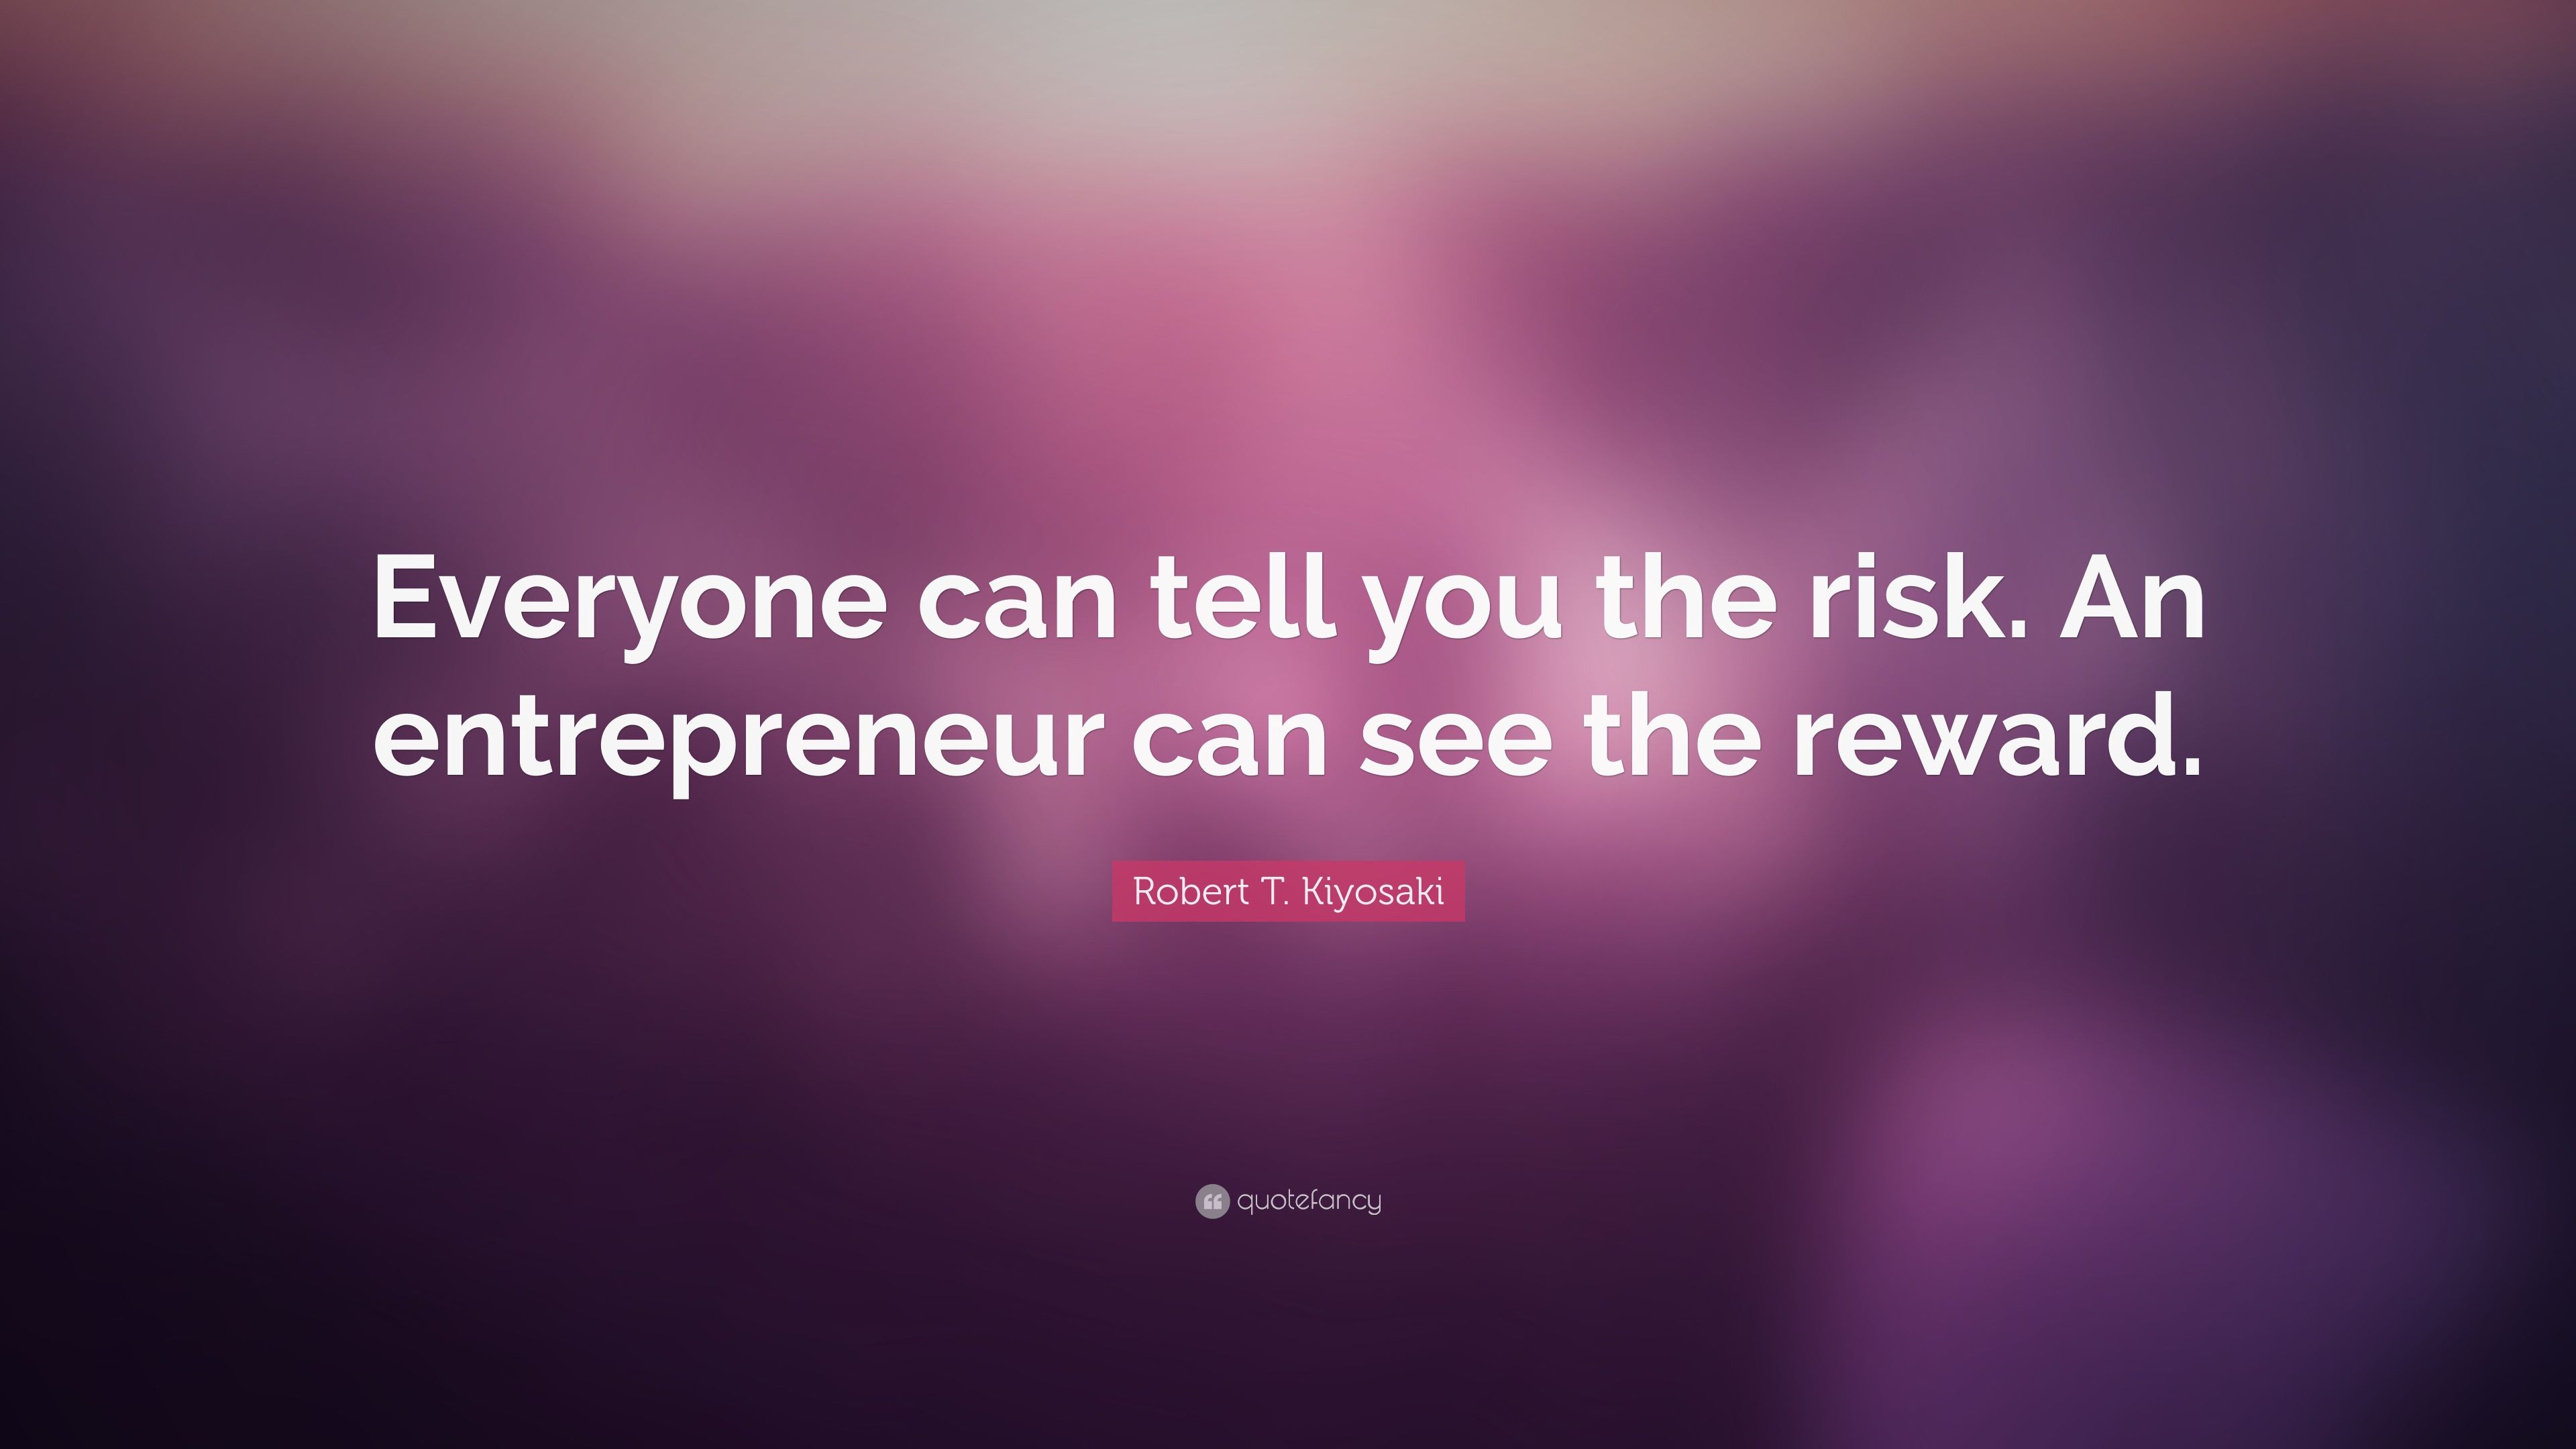 Robert T. Kiyosaki Quote: “Everyone can tell you the risk. An